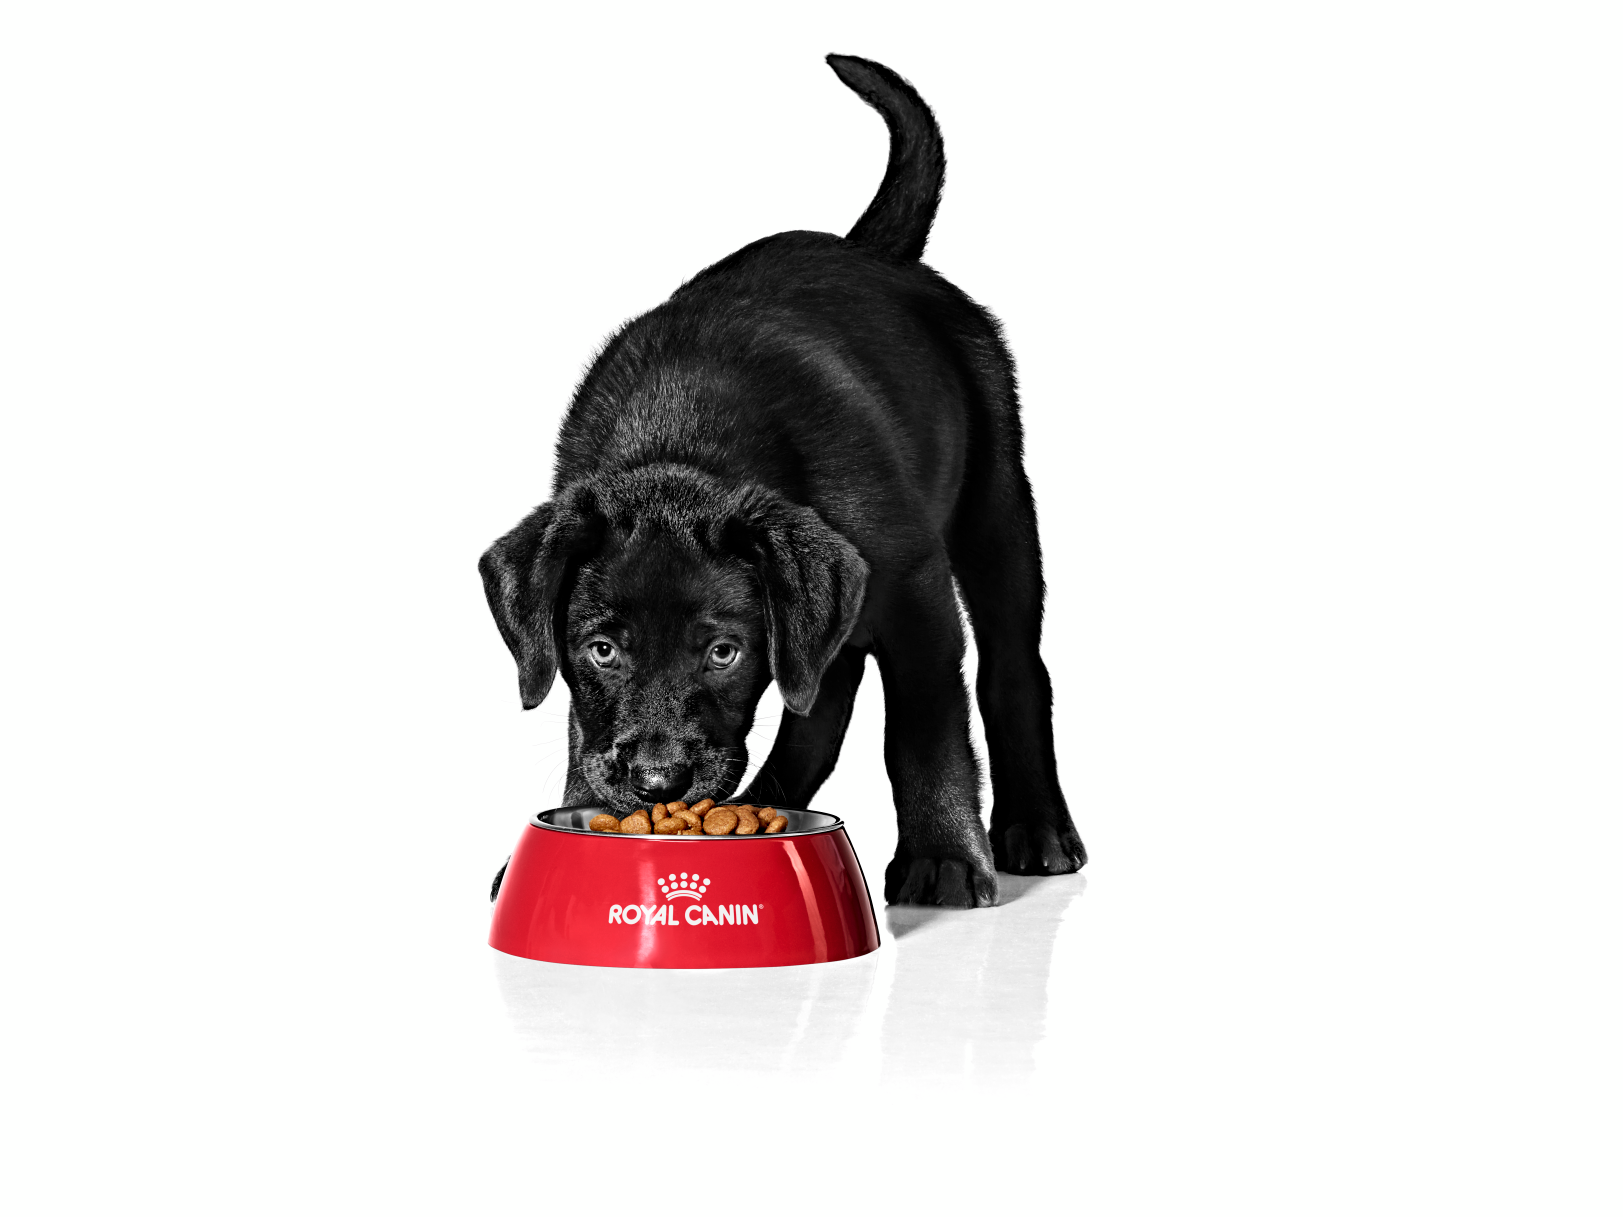 labrador puppy standing inside eating from a red bowl